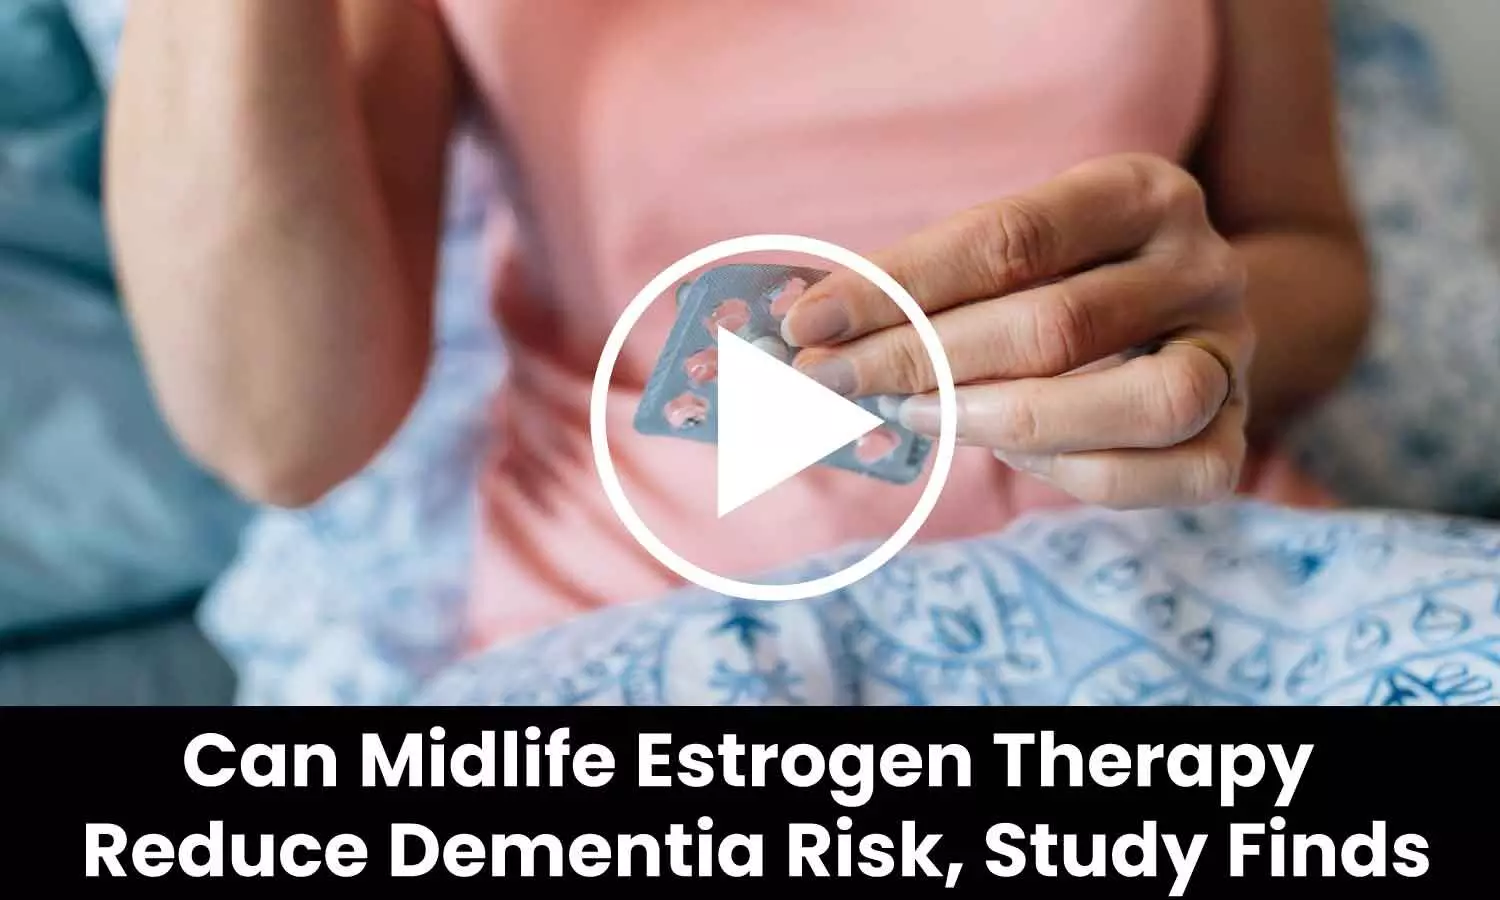 Can Midlife Estrogen Therapy Reduce Dementia Risk, Study Finds